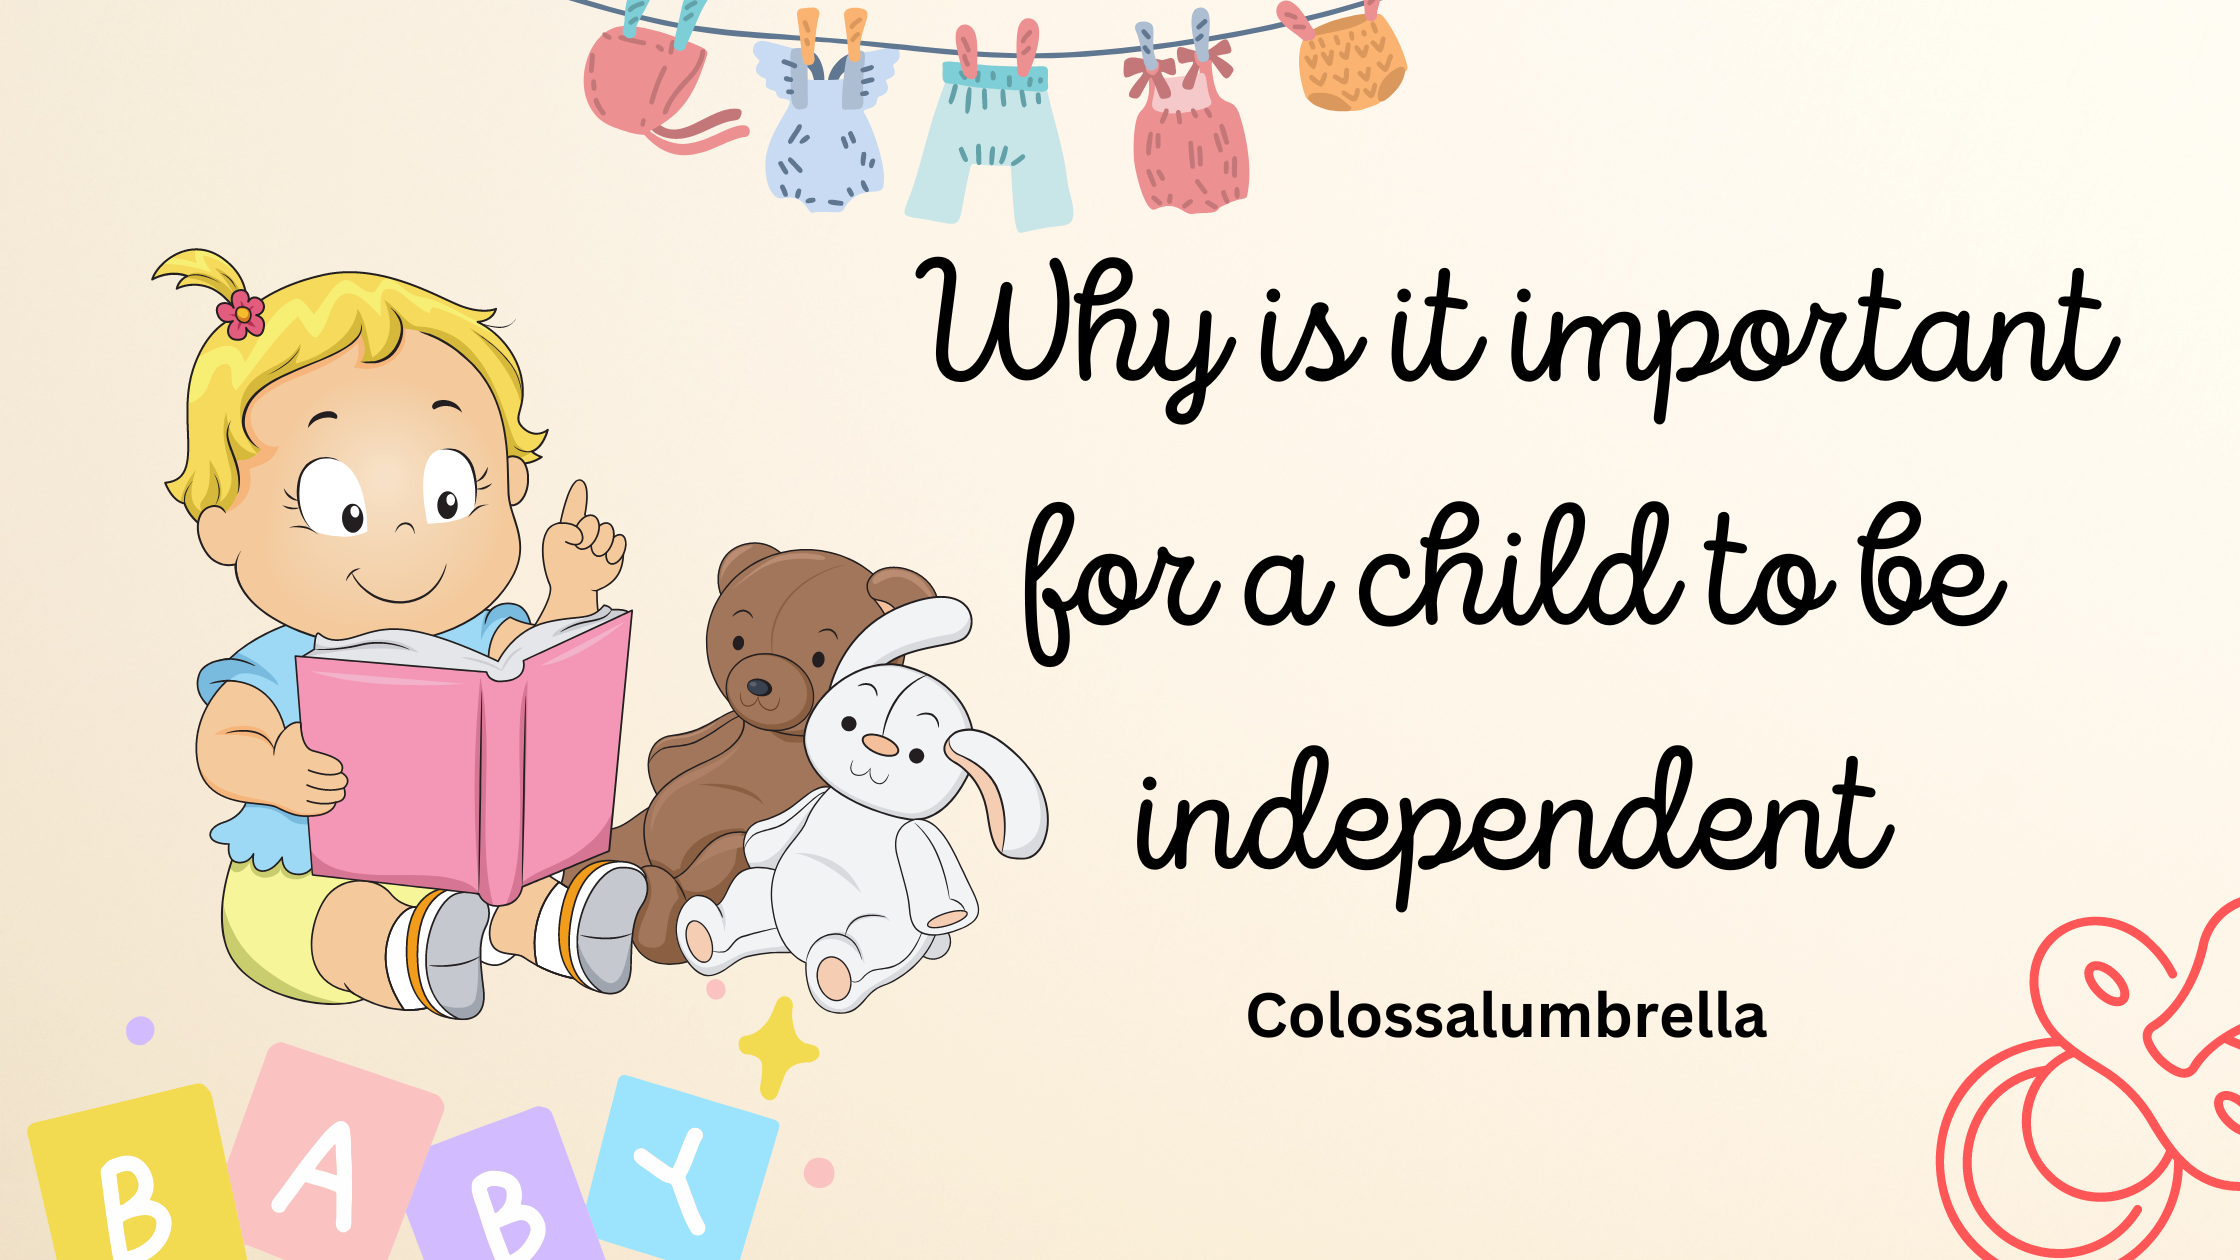 7 Reasons why is it important for a child to be independent